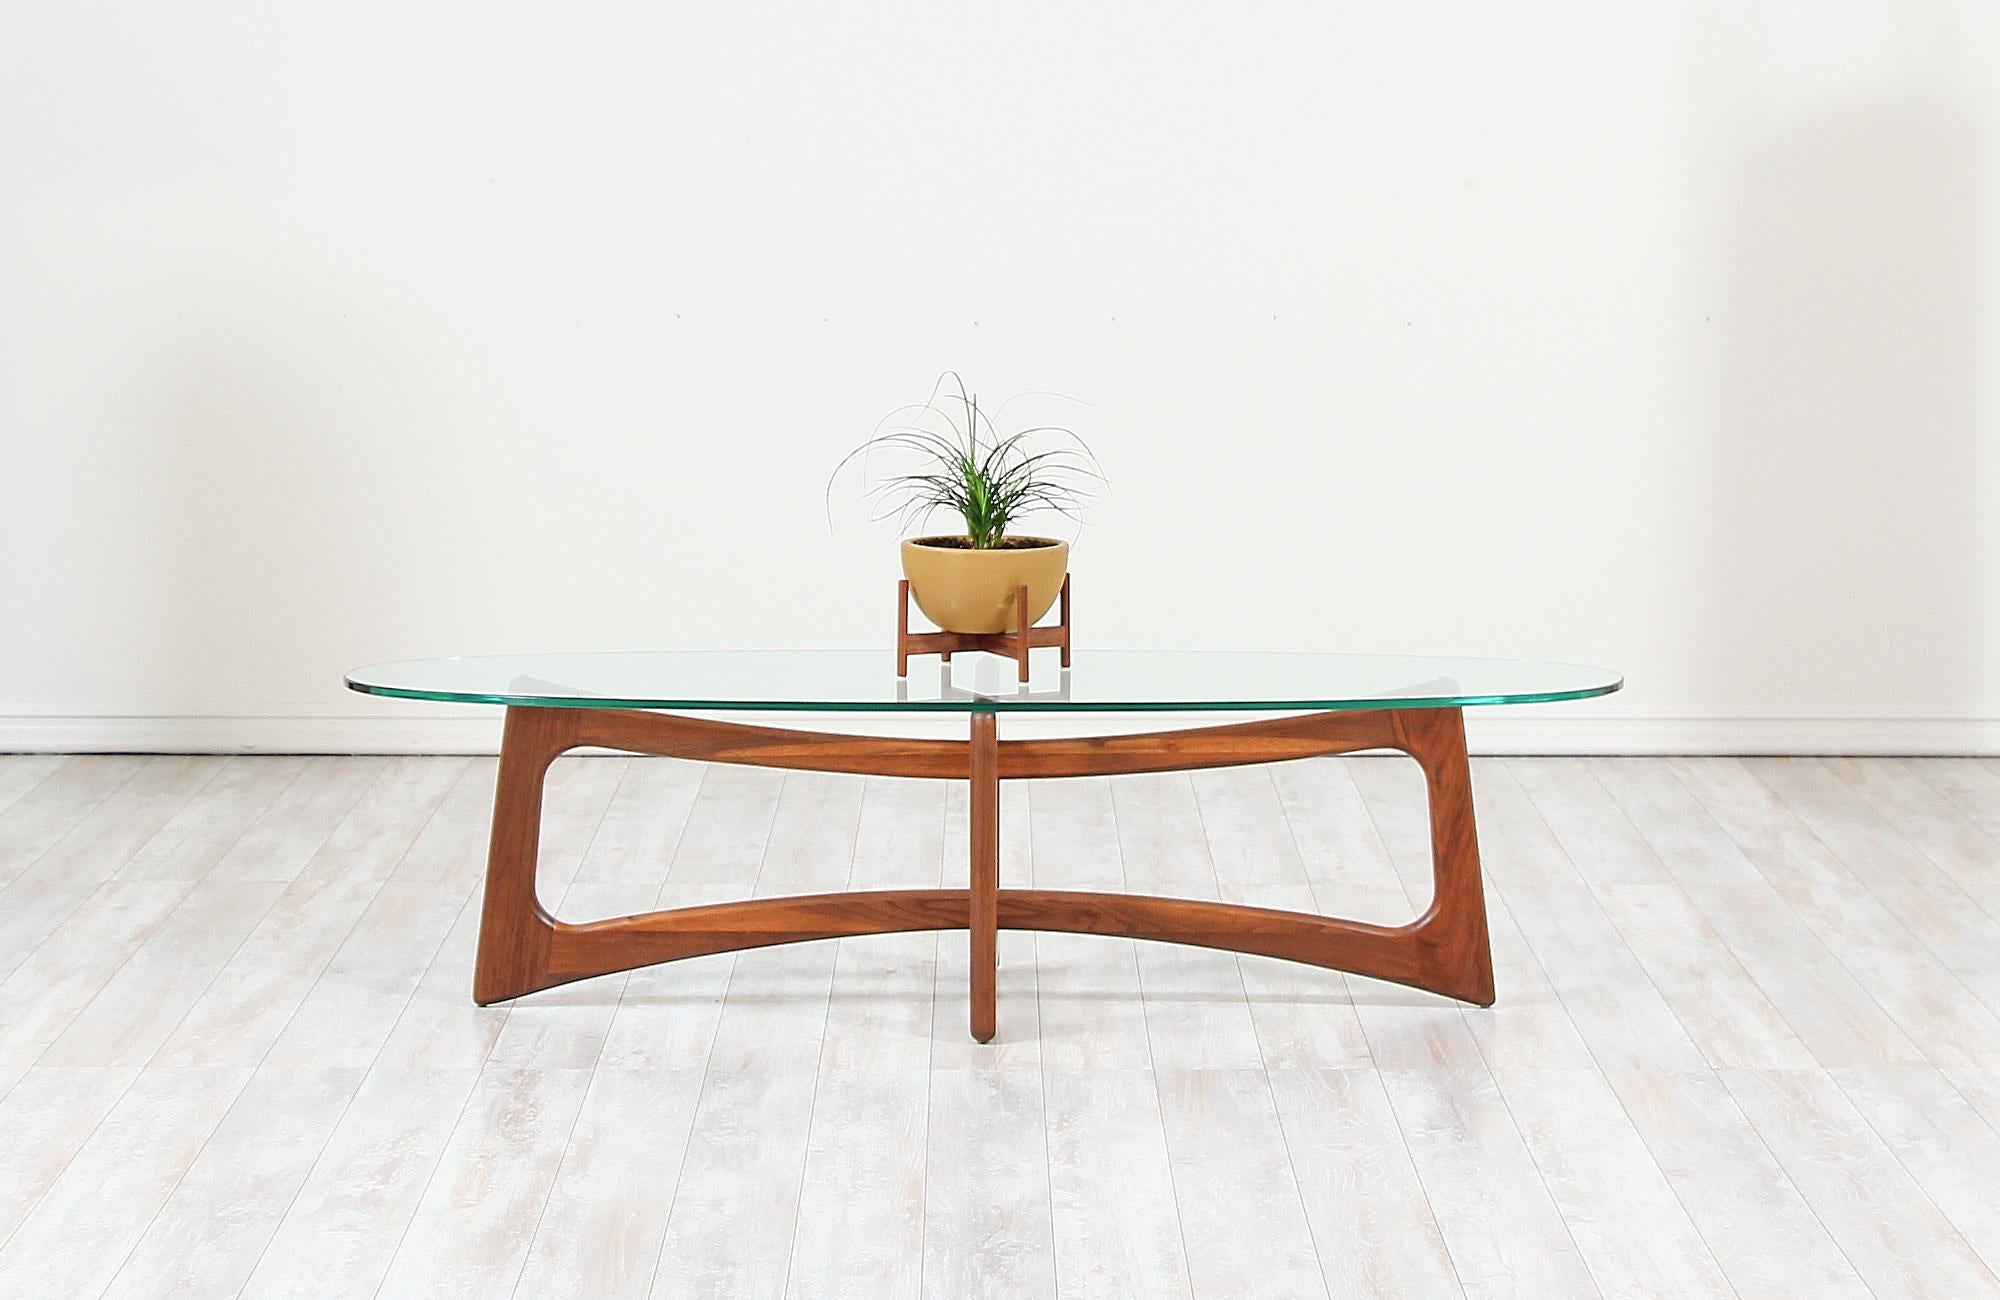 Stylish modern coffee table model 2454-TGO designed by Adrian Pearsall for Craft Associates in the United States, circa 1960s. Designed by one of the most iconic American designers, this model is often referred to as the “Ribbon Table” due to its